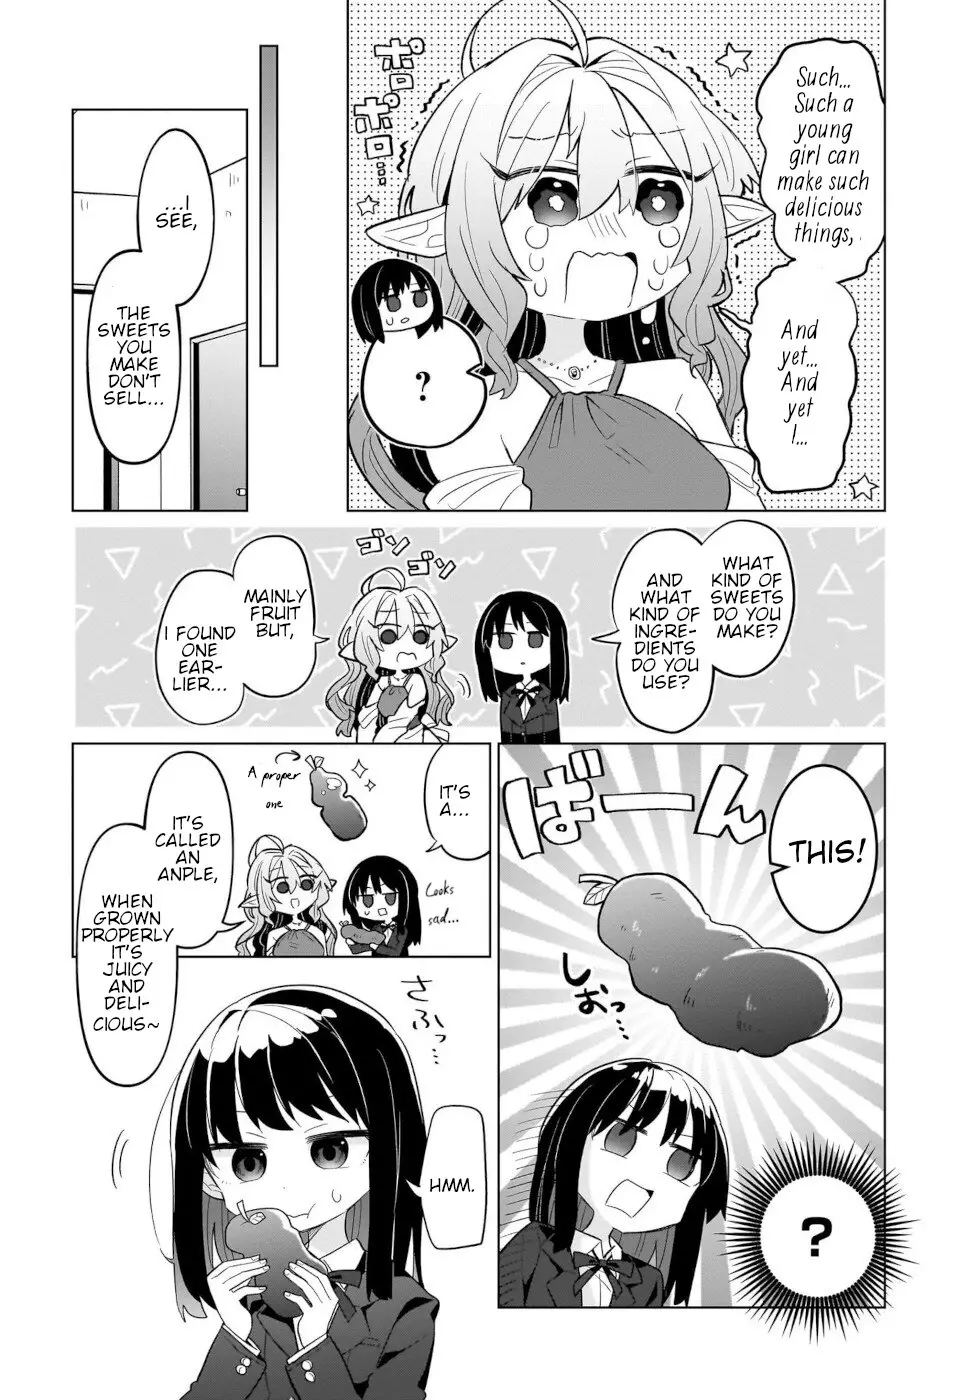 Sweets, Elf, And A High School Girl - 1 page 18-c73224cf